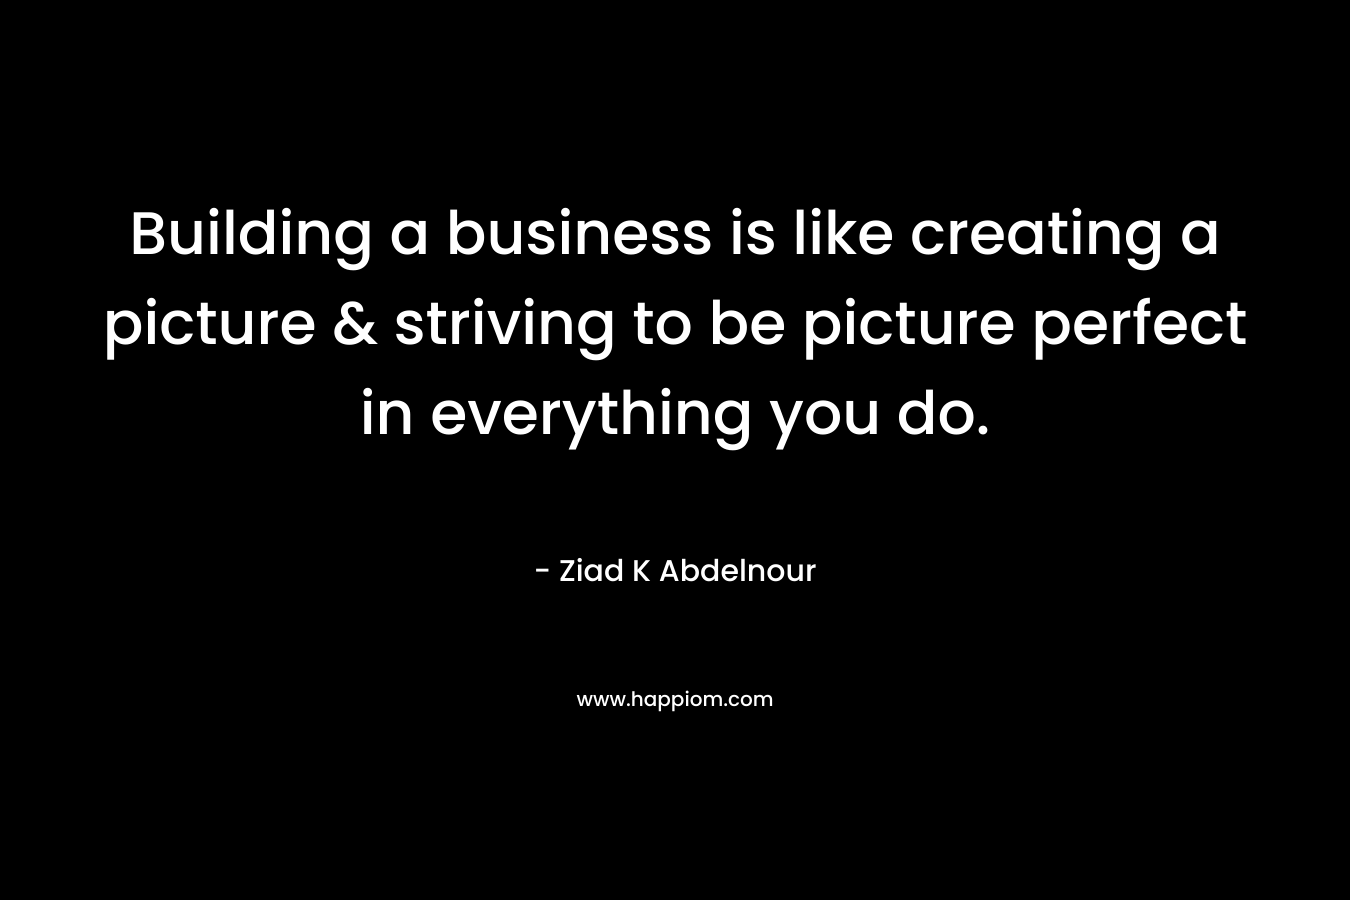 Building a business is like creating a picture & striving to be picture perfect in everything you do.